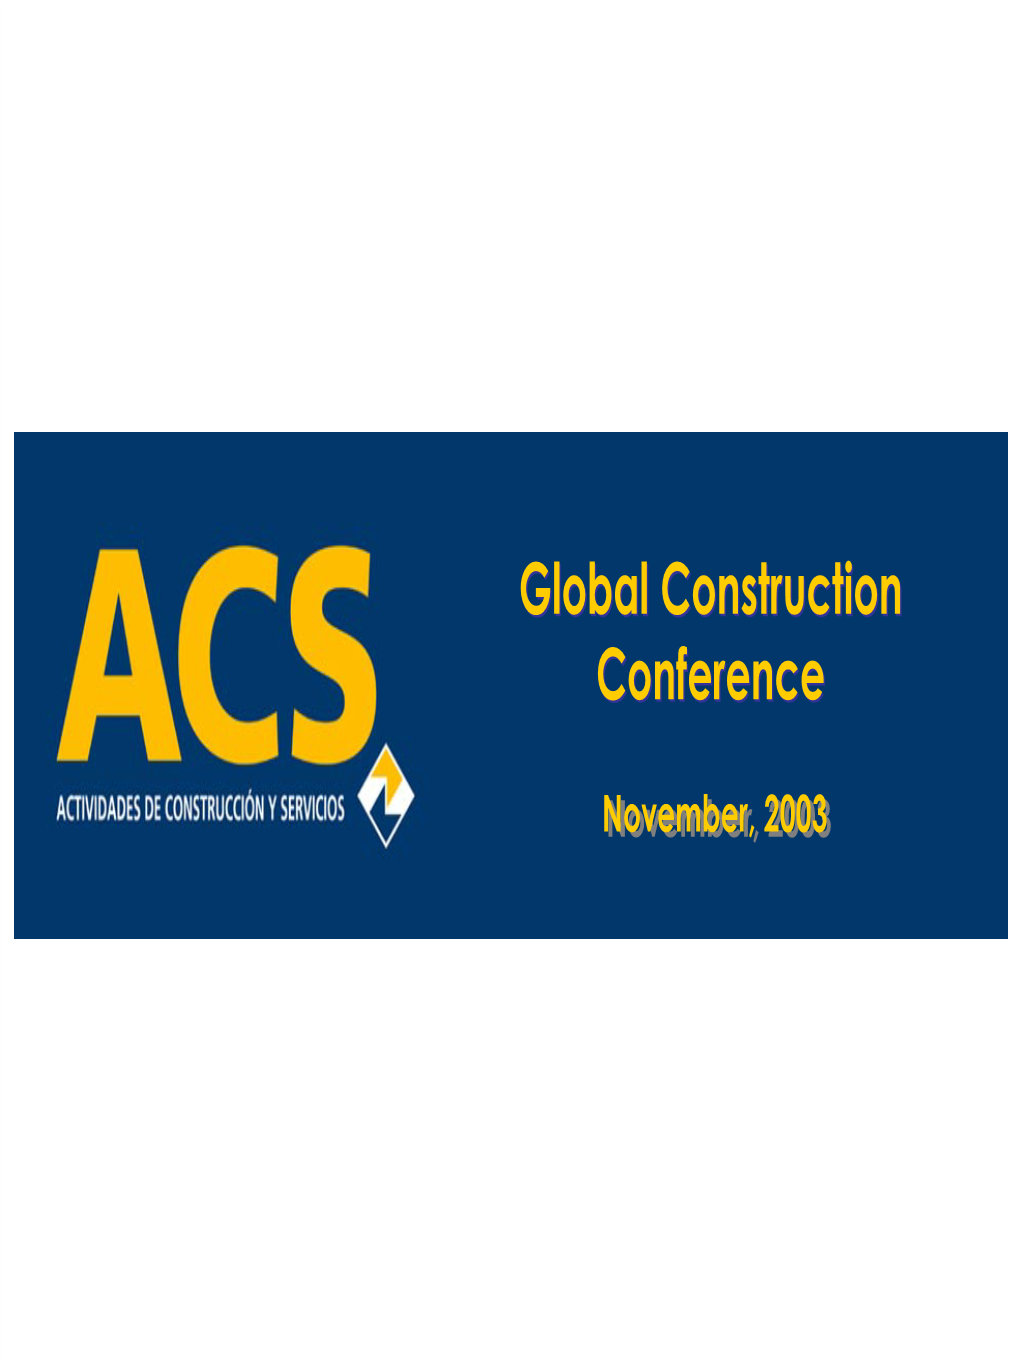 The New ACS Group Construction 1H/03 Revenues